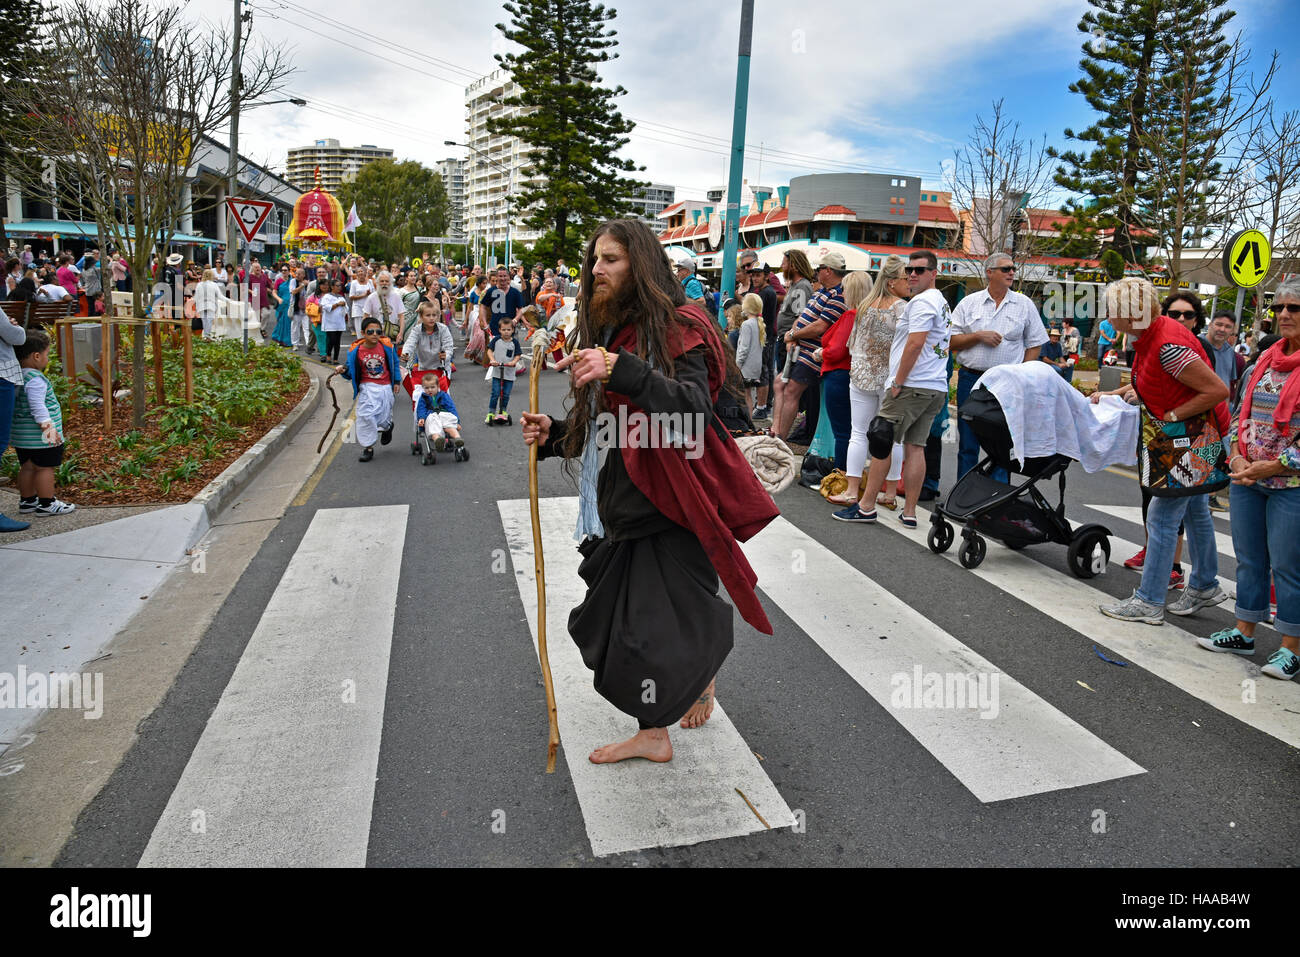 pilgrim leading hare krishna group at 'cooly rocks on' parade at coolangatta at the gold coast queensland australia Stock Photo